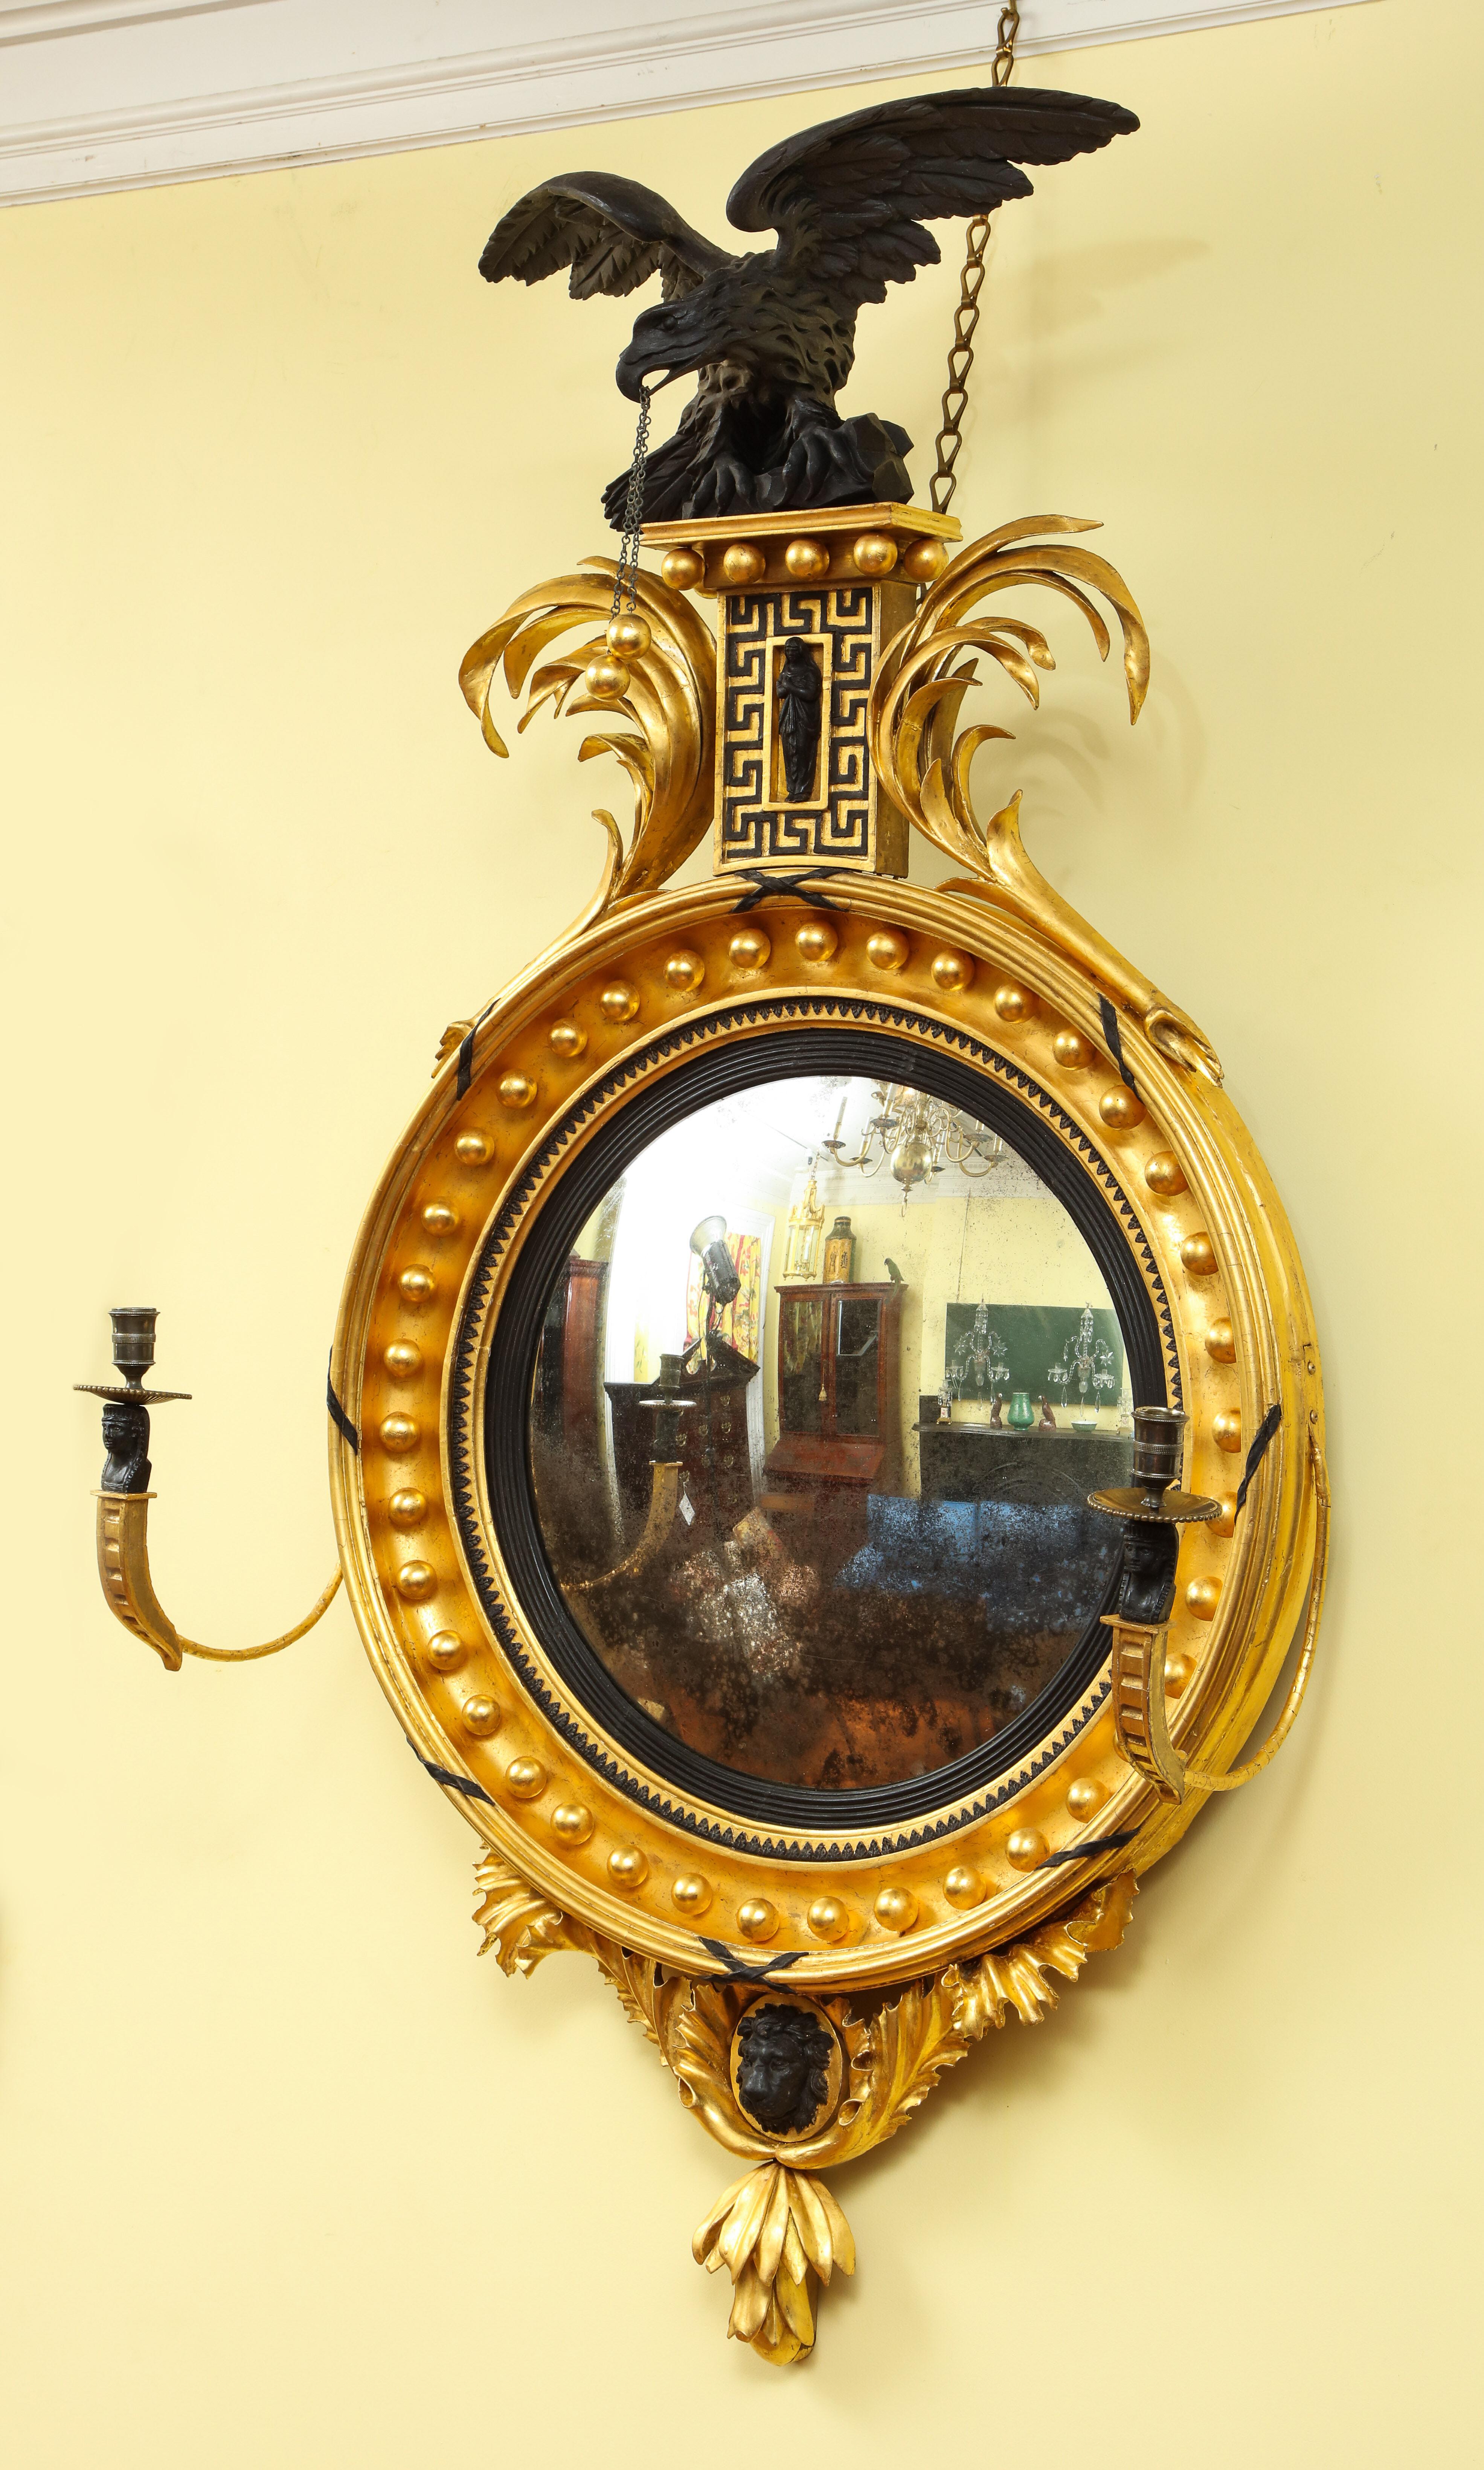 Fine Regency giltwood and ebonized convex mirror in the Egyptian taste, having an ebonized spread winged carved eagle surmount with gilt balls and chain suspended from its beak, on a raised central gilt plinth having applied meandering Greek key